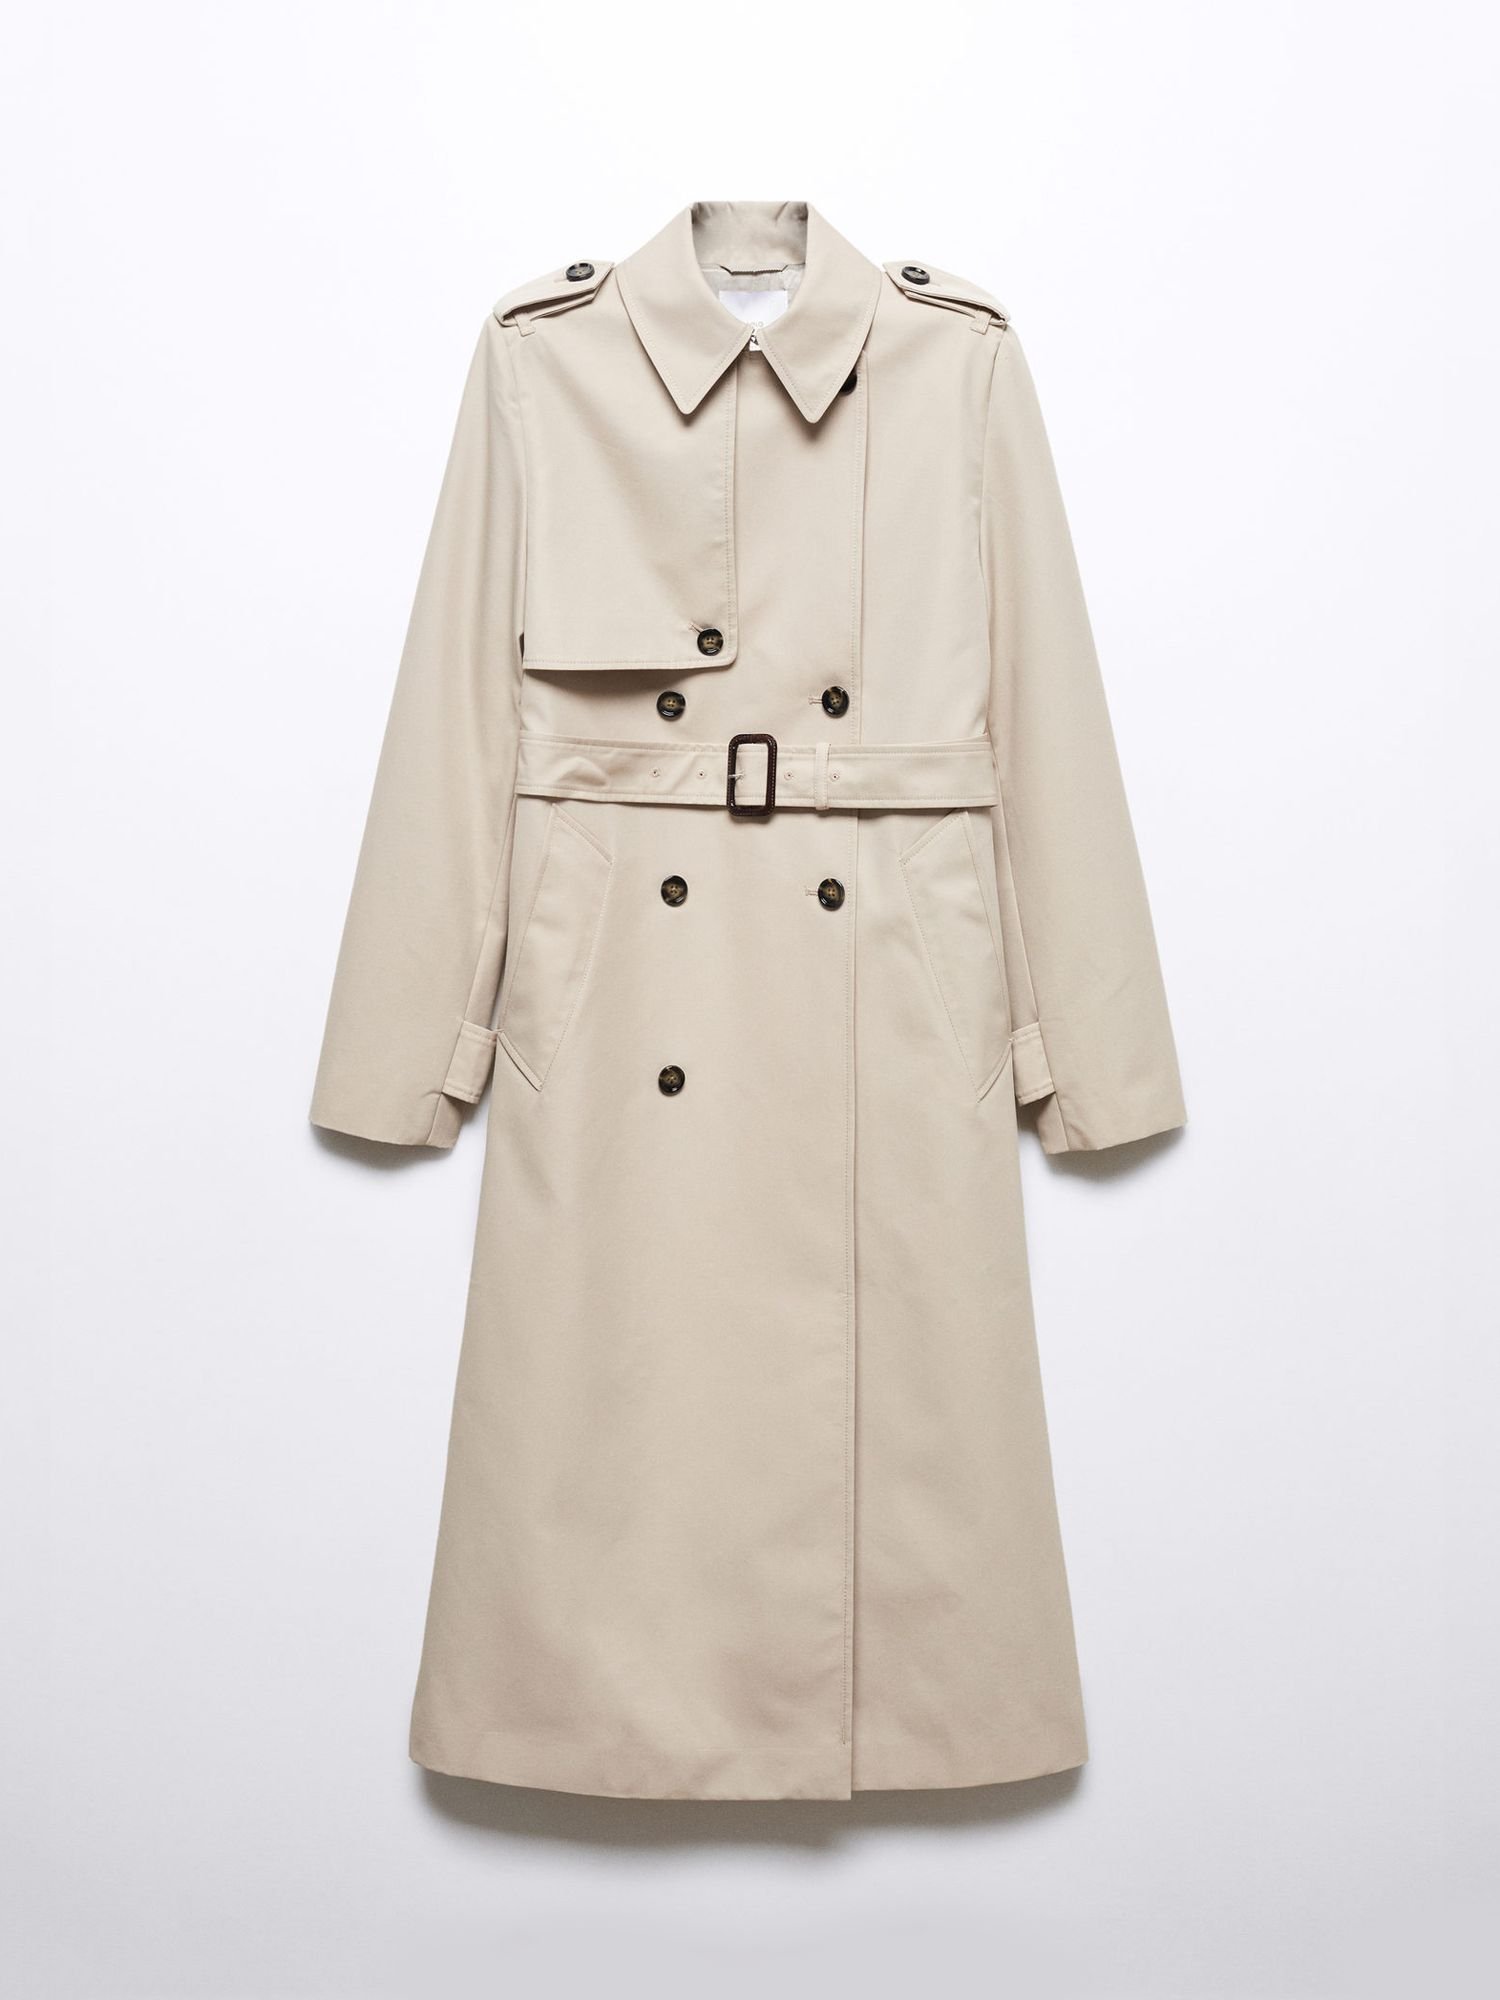 MANGO Chicago Waterproof Double Breasted Trench Coat in Black | Endource